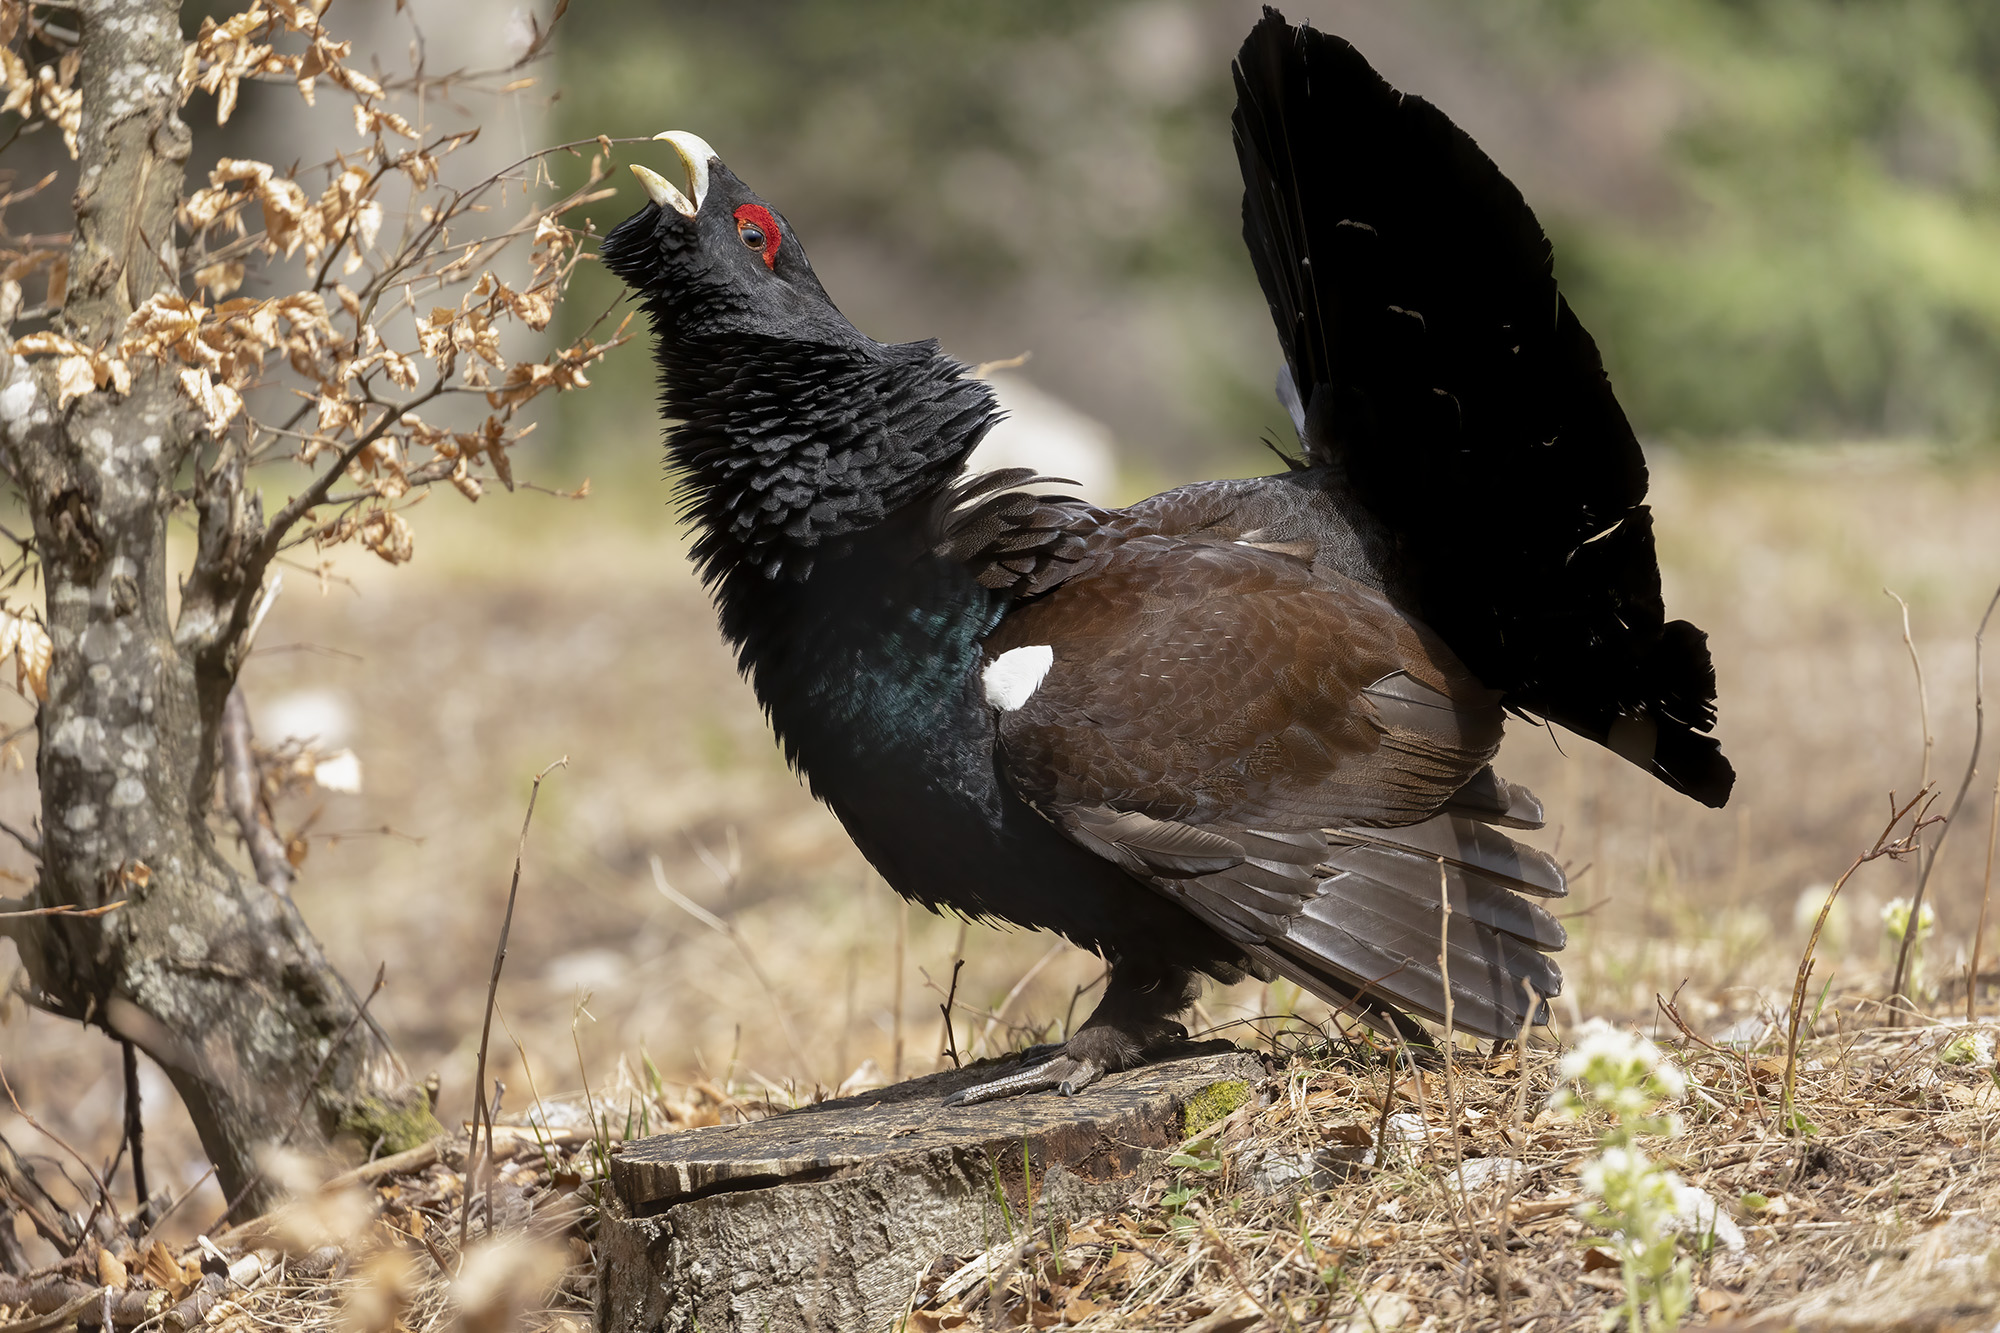 on the stump, capercaillie...